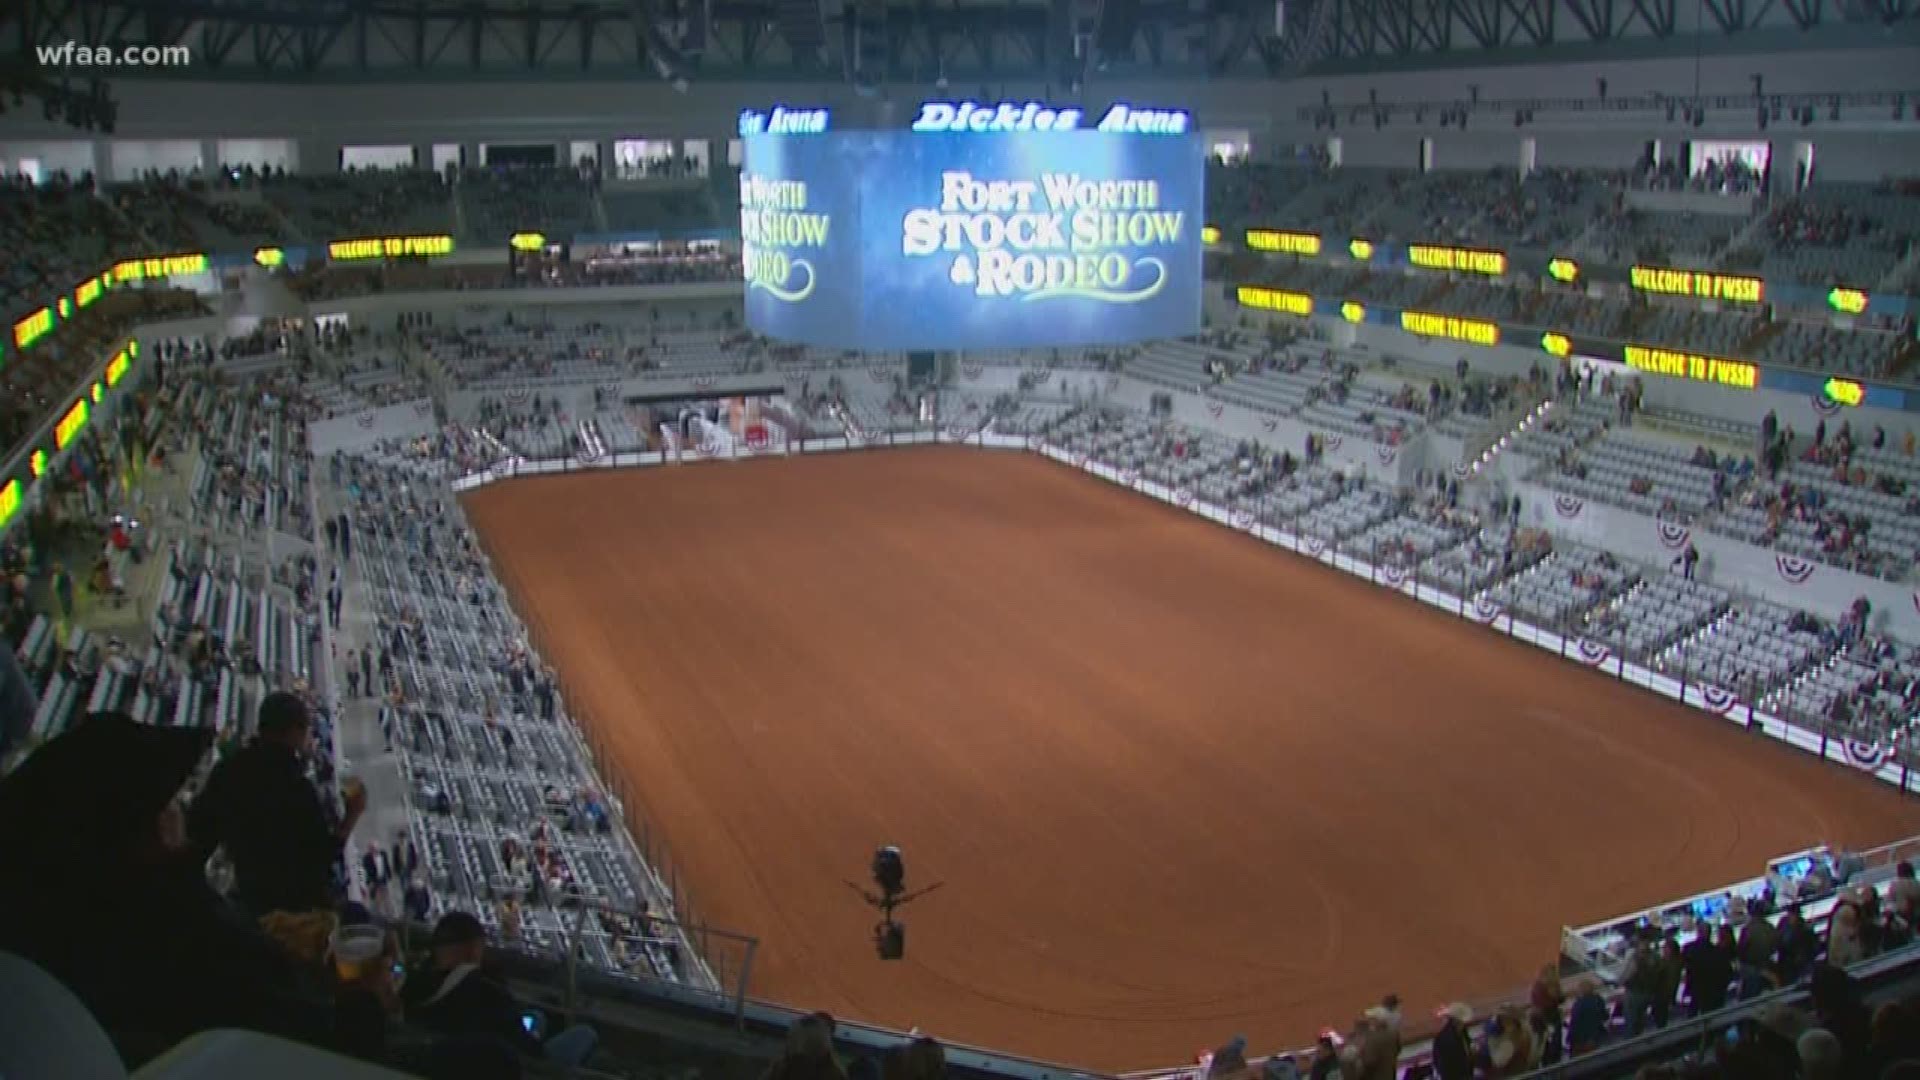 Fort Worth Stock Show and Rodeo kicks off a new era inside Dickies